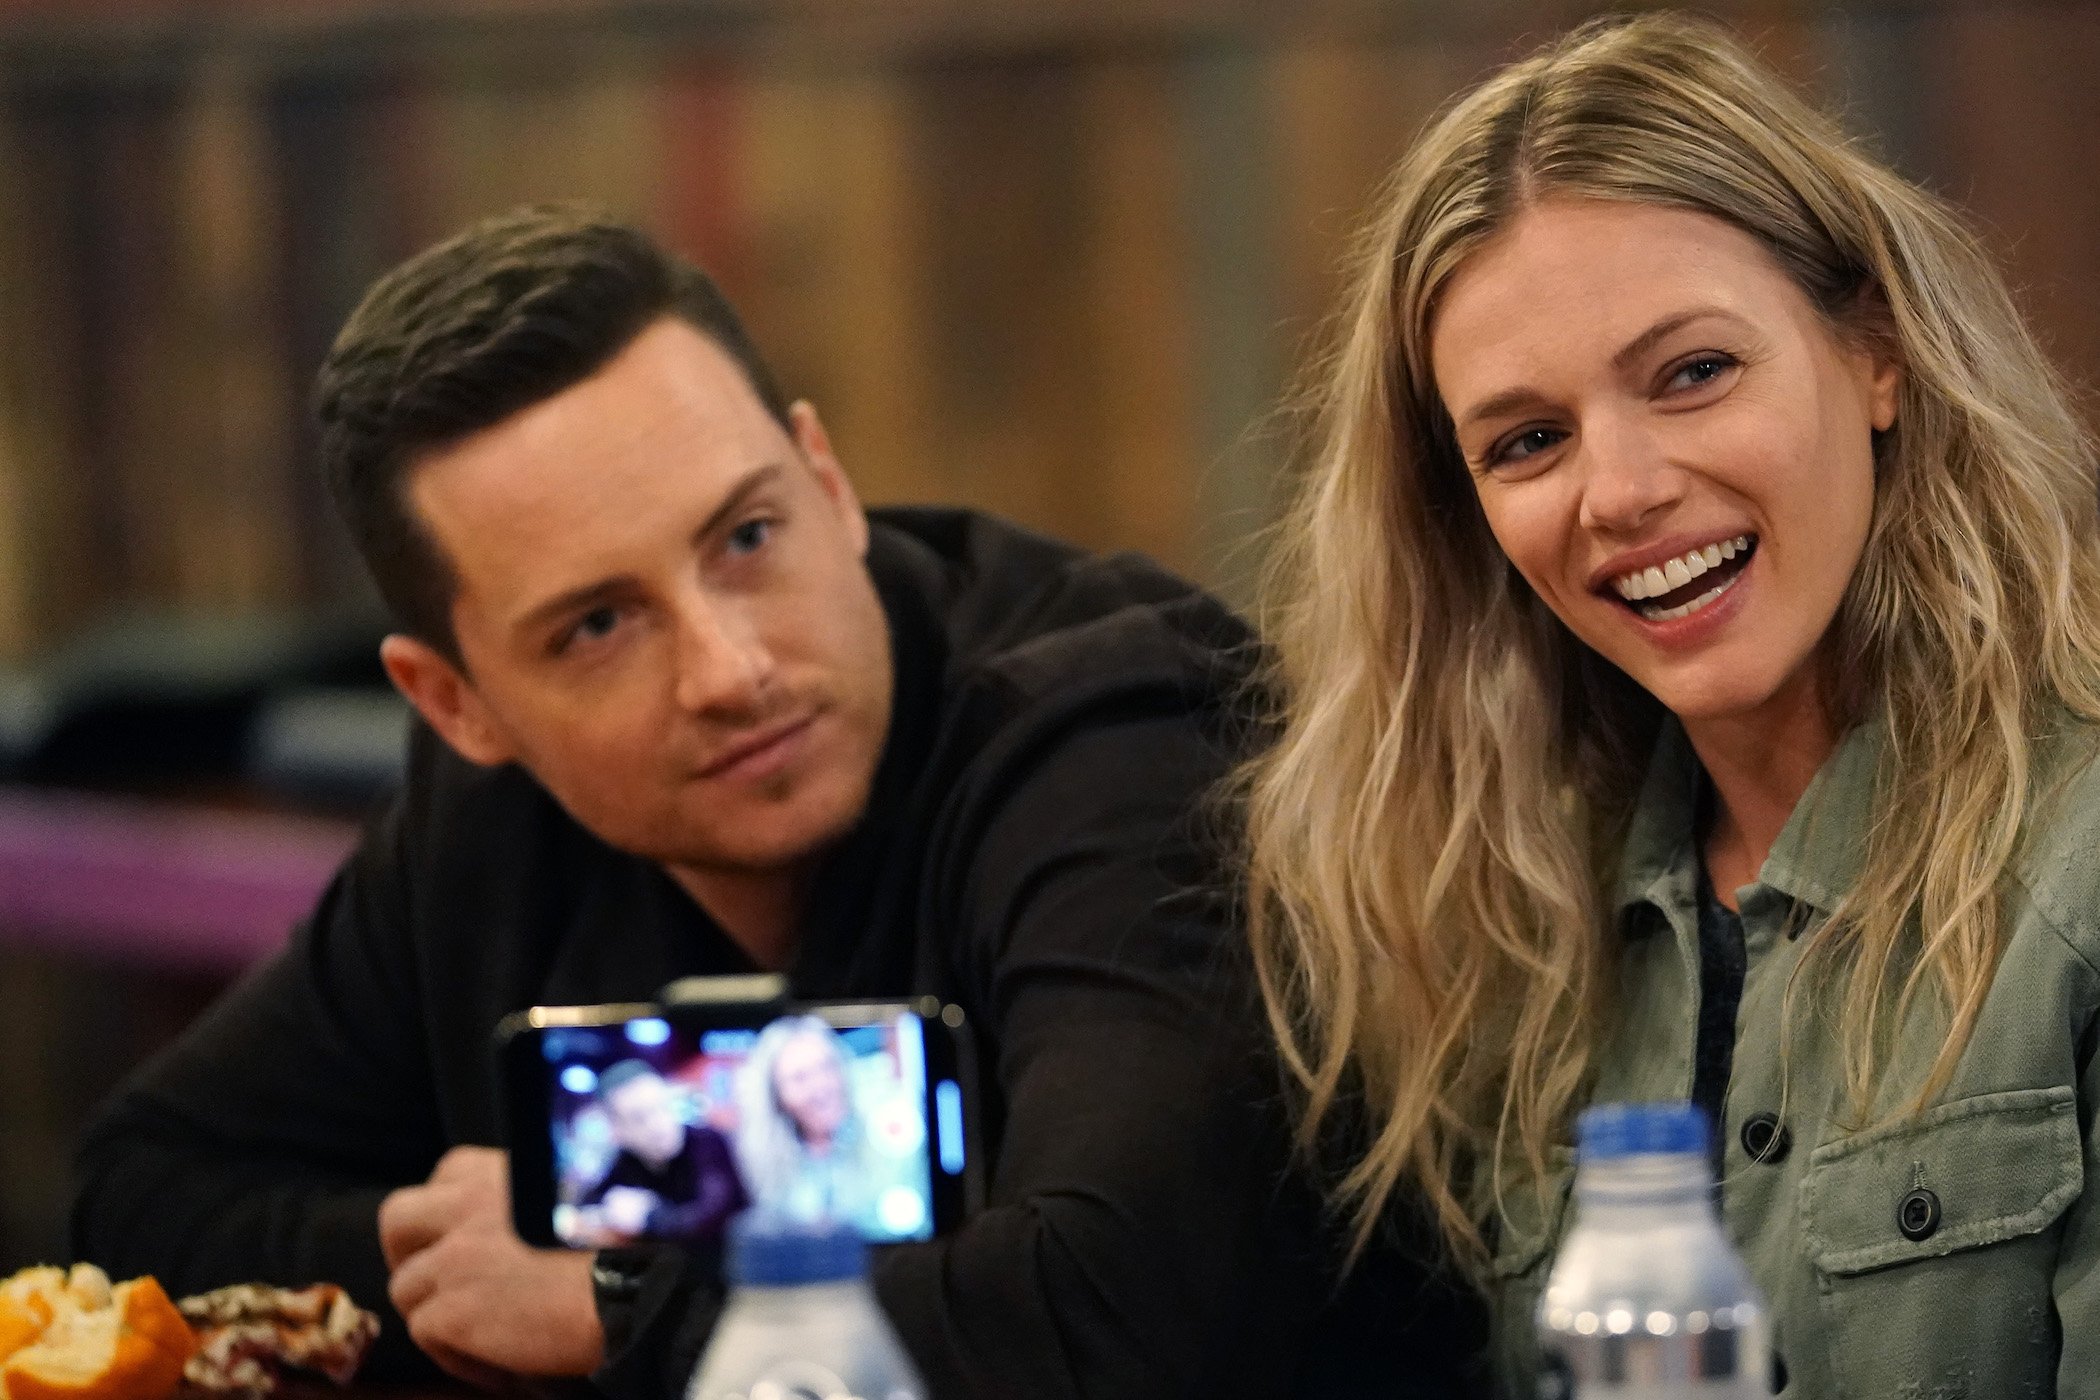 Jesse Lee Soffer and Tracy Spiridakos next to each other and talking at a 'Chicago P.D.' event.